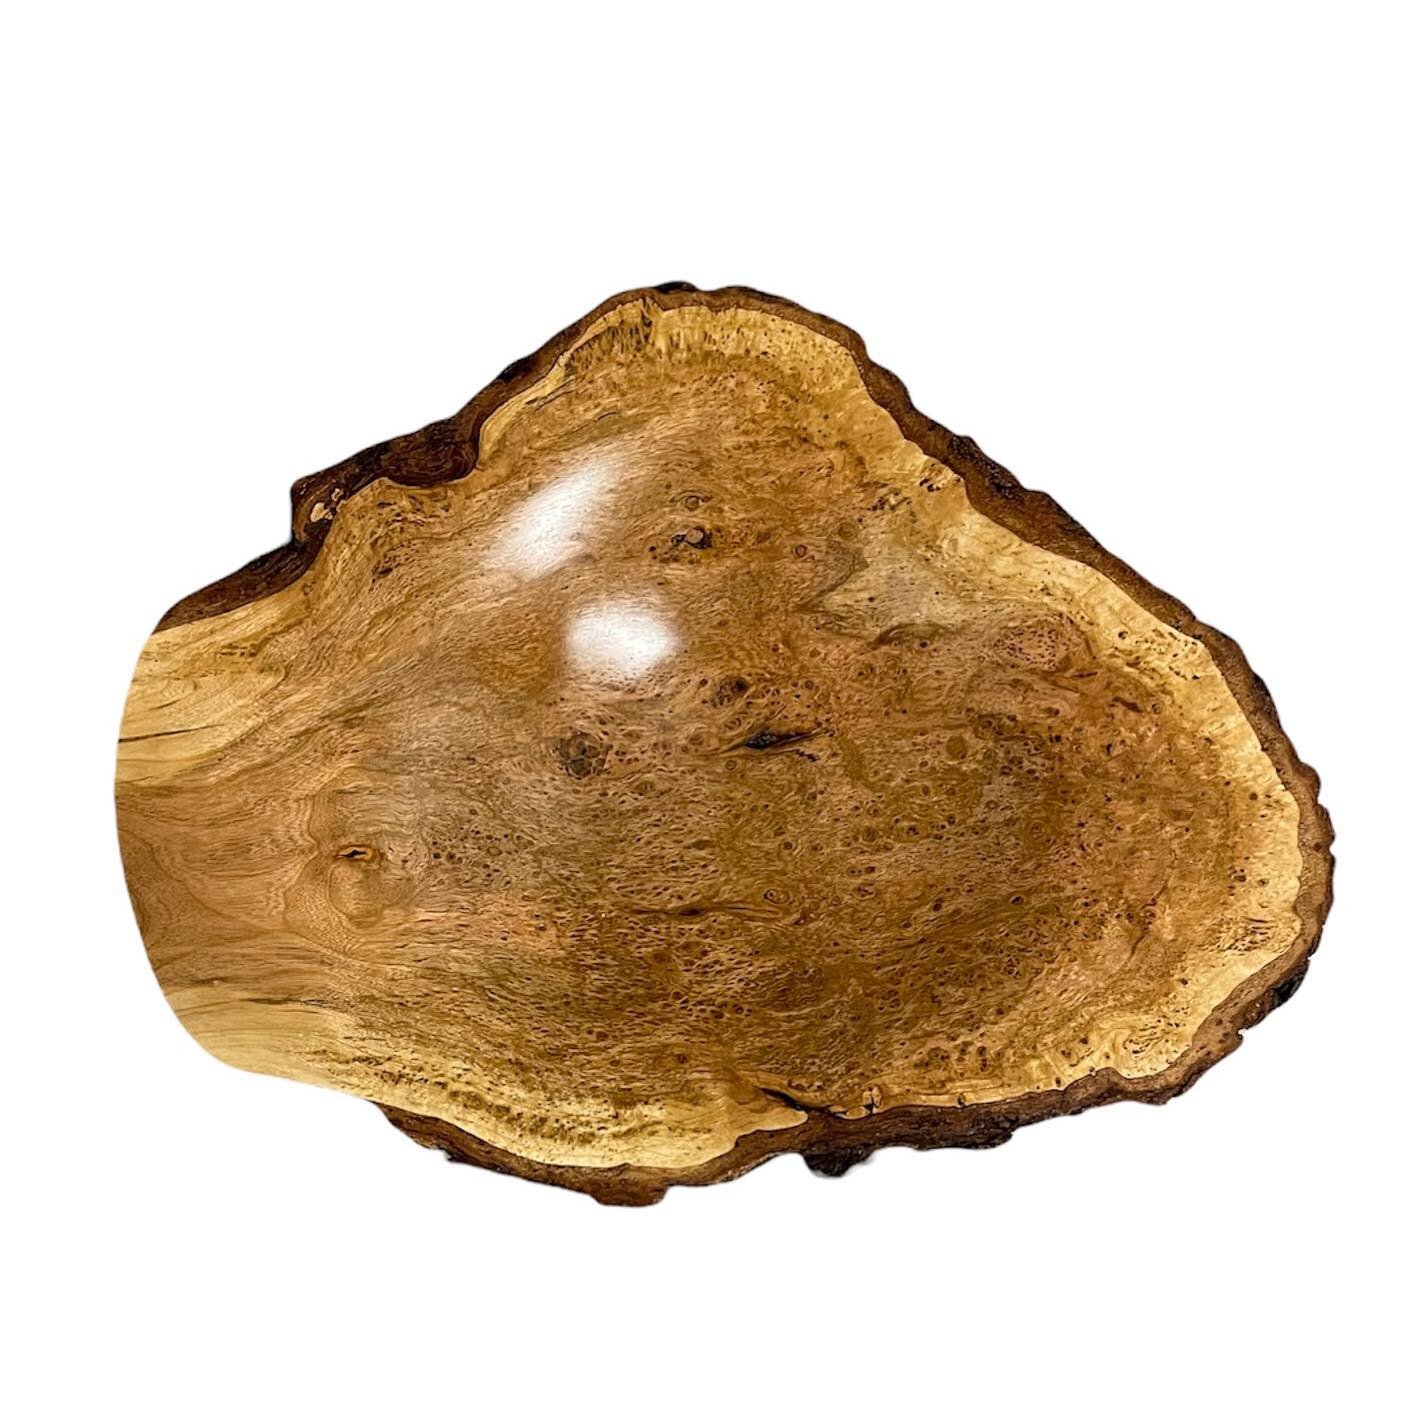 Black Cherry Burl has rich variations of colour and unique figuring. This live edge bowl has many layers of food safe oil for a durable, polished finish. 

Black Cherry Burl Bowl 12&nbsp;x 2.25 high

#woodturner #woodworking #cherrybowl #liveedgebowl